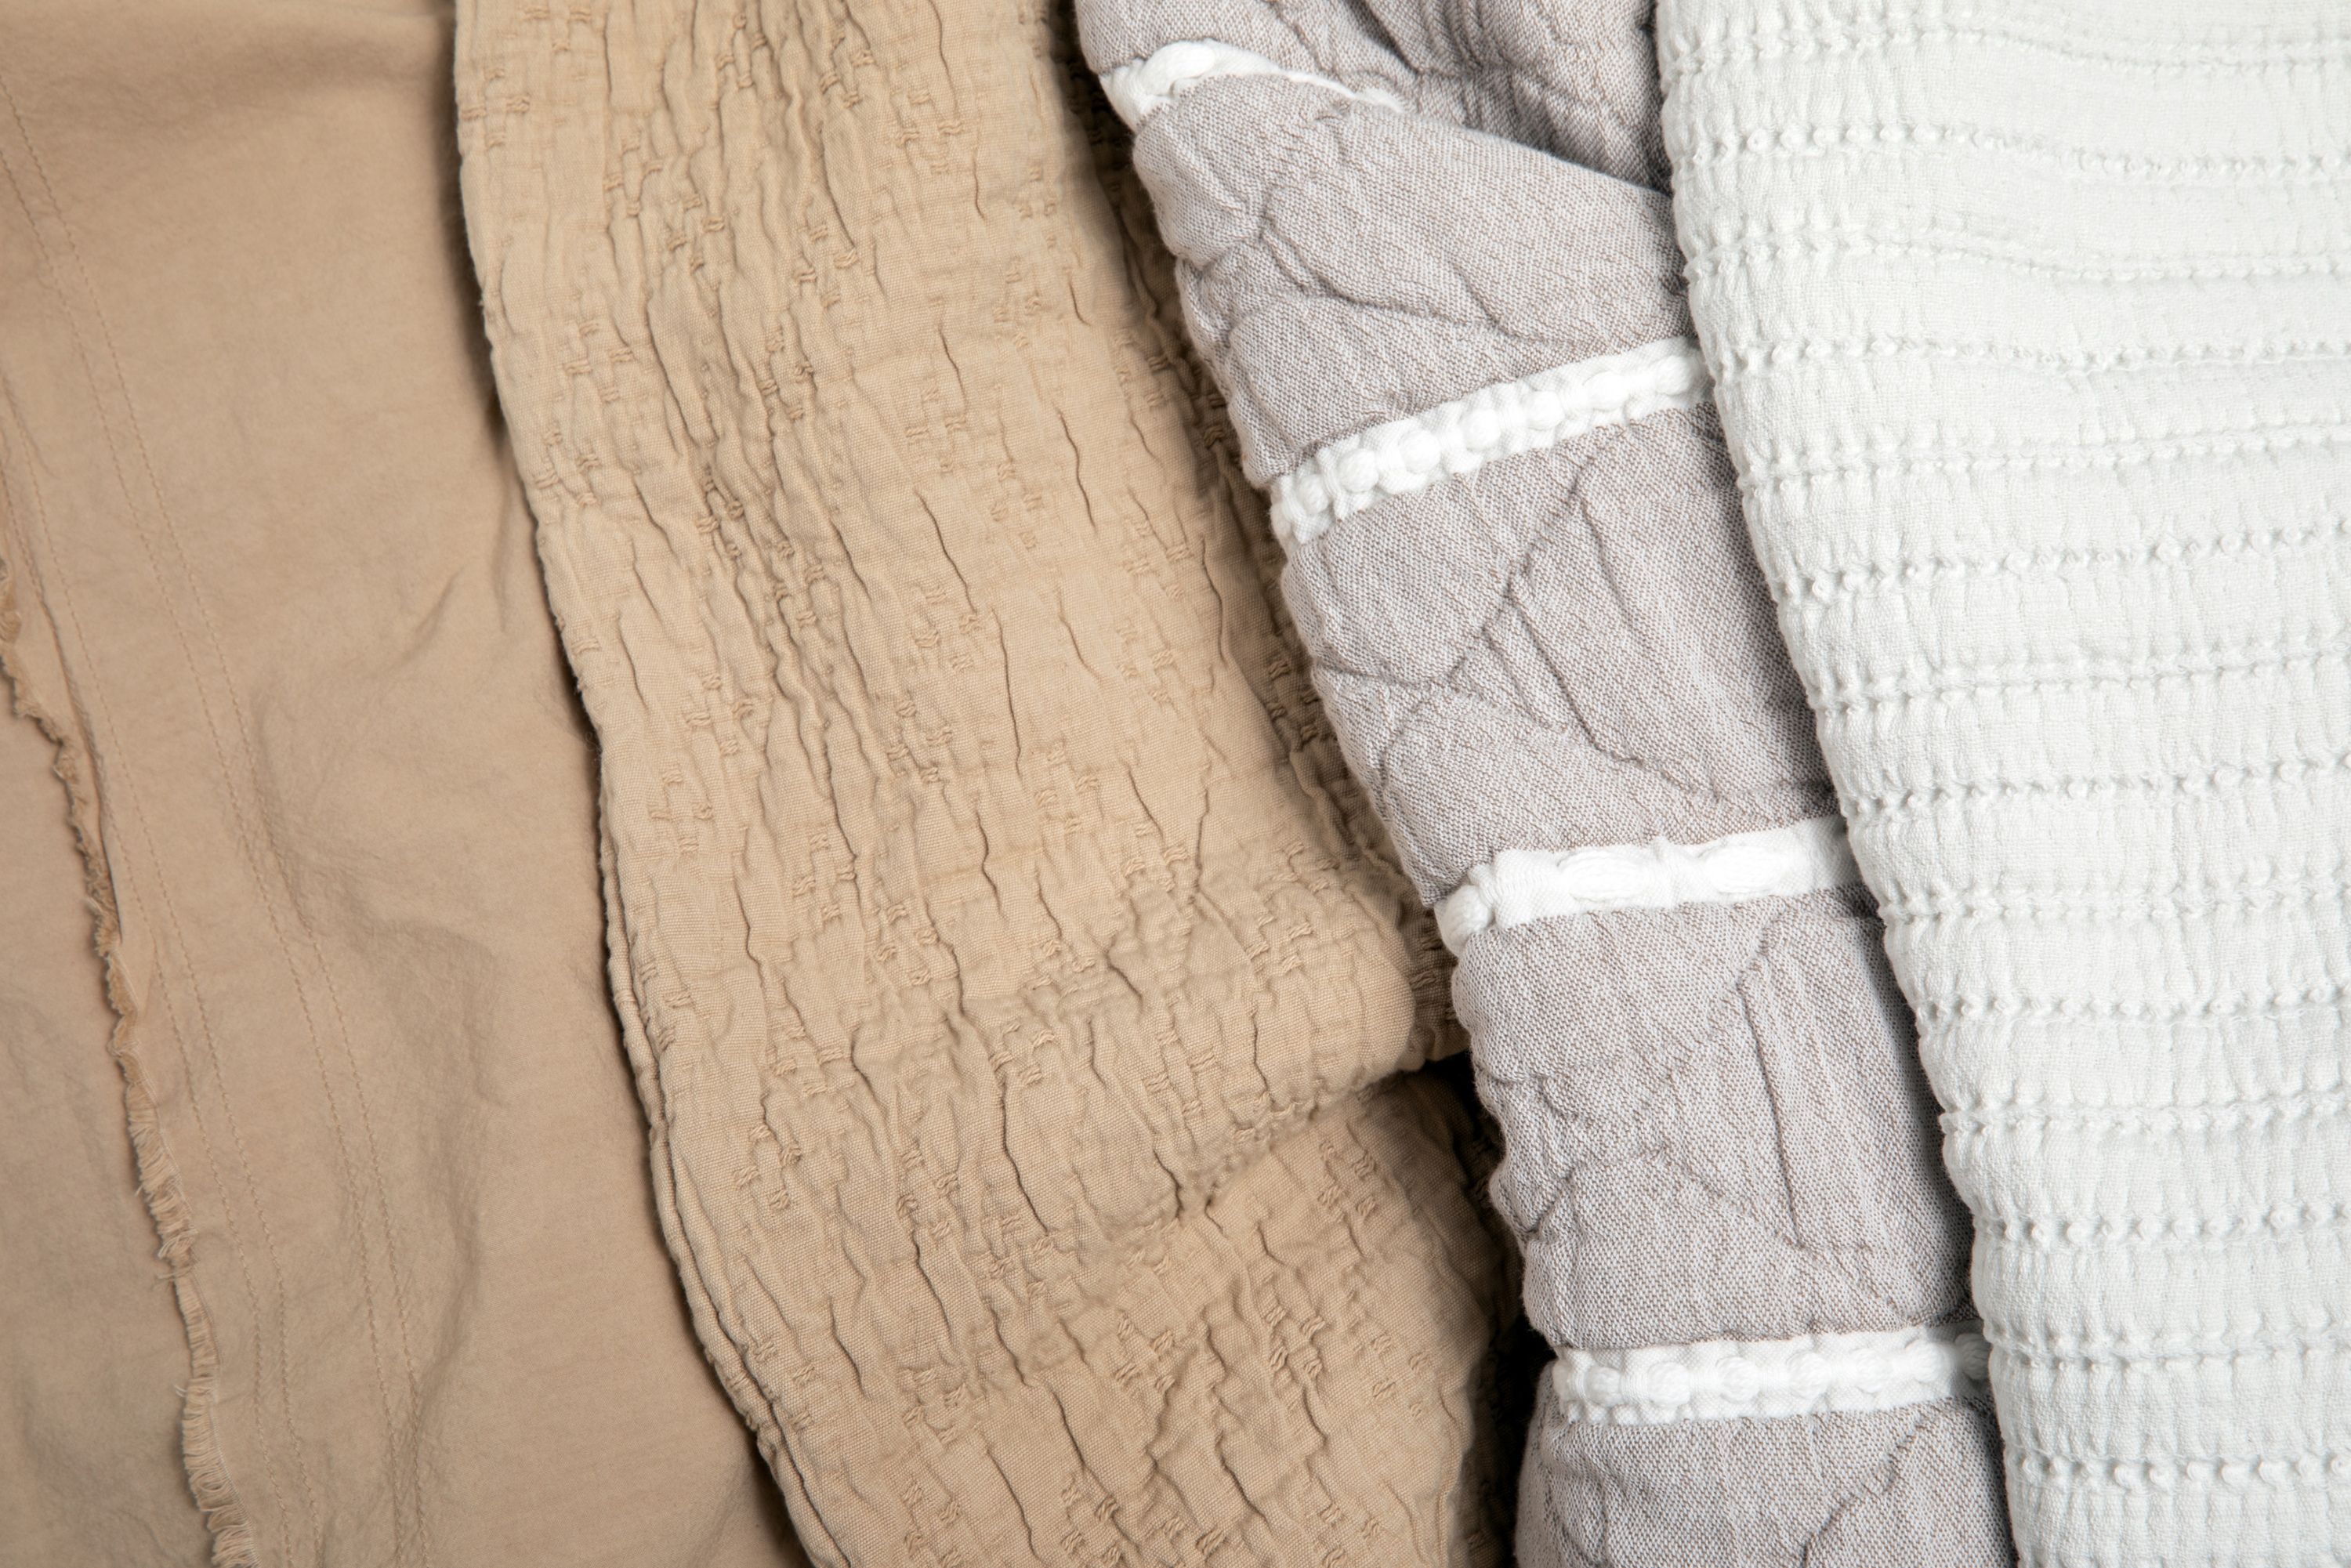 Image of four Dr. Weil products side-by-side. From left to right: Ochre Garment Washed Sheets, Ochre Wave Coverlet, Heritage Quilt, Ecru Ridgeback Coverlet